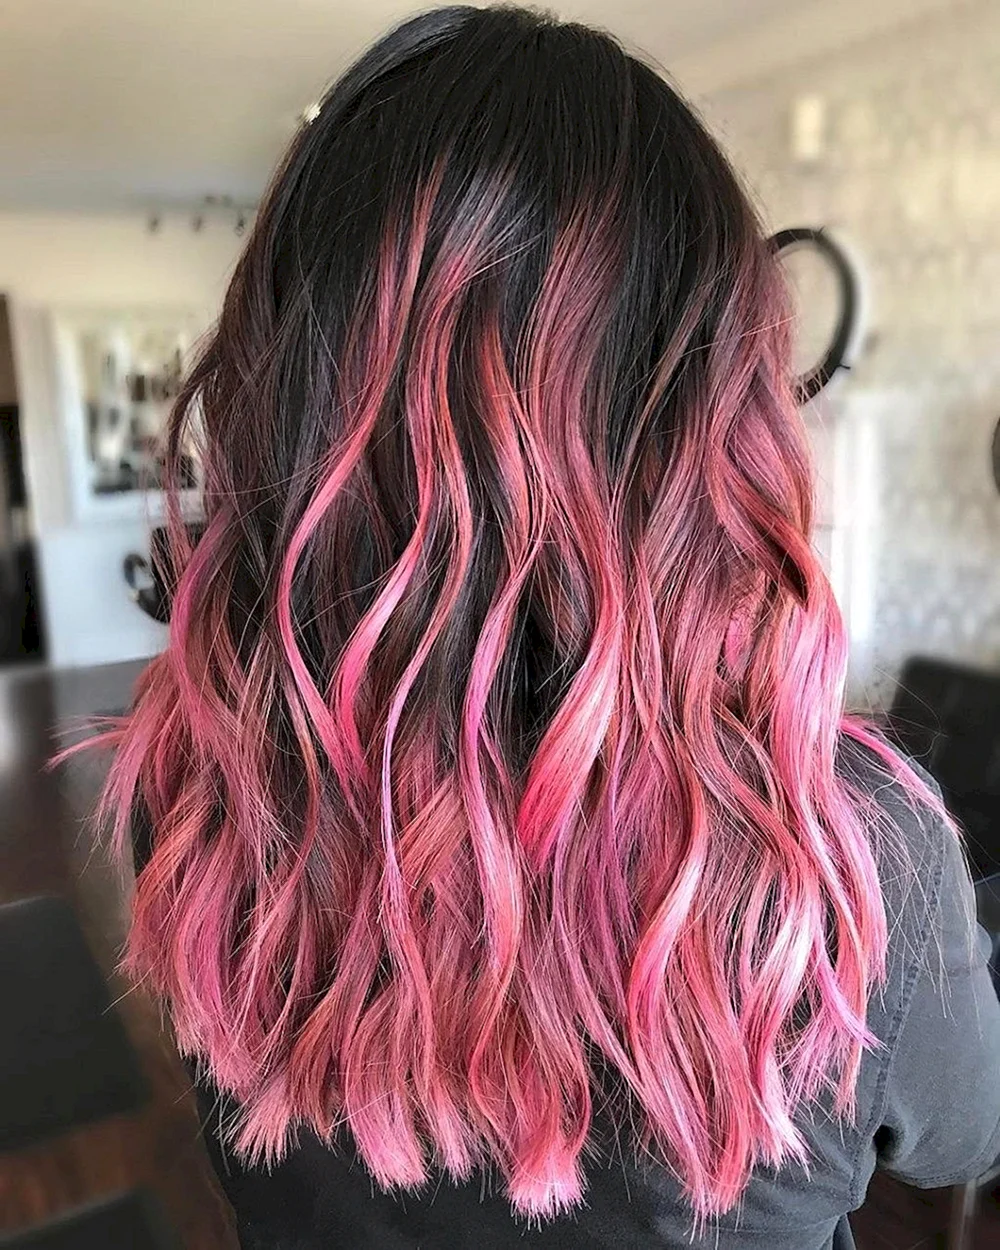 Black and Pink hair